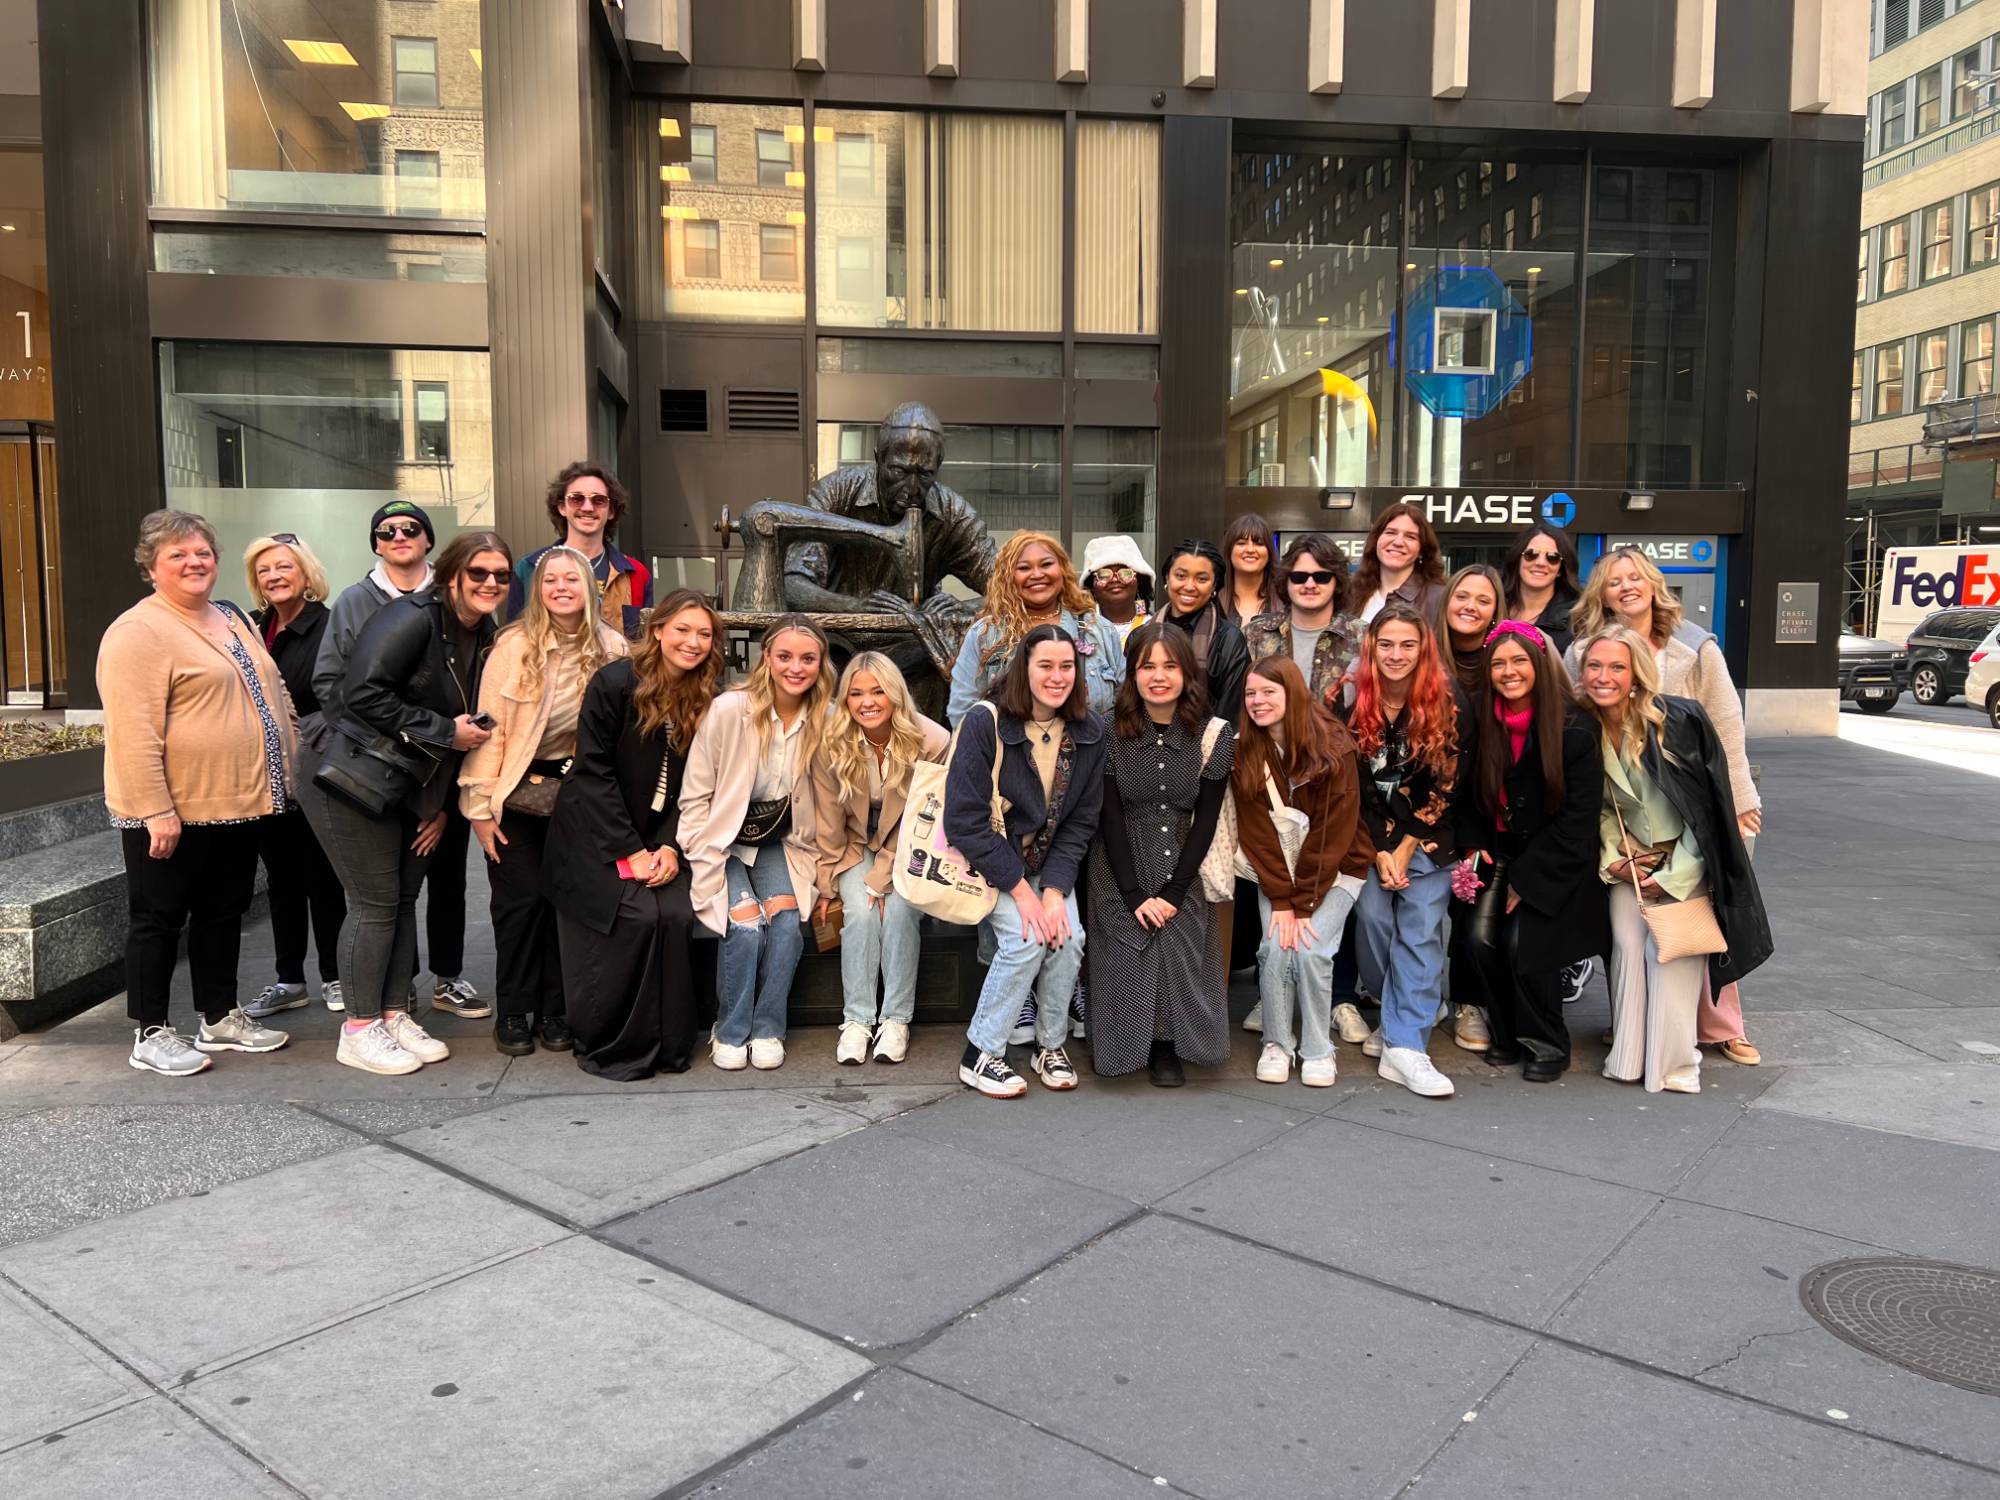 Touring the famous Garment District of New York City with Mike Kaback, a well-respected member of the NYC fashion industry (and lifelong local!)